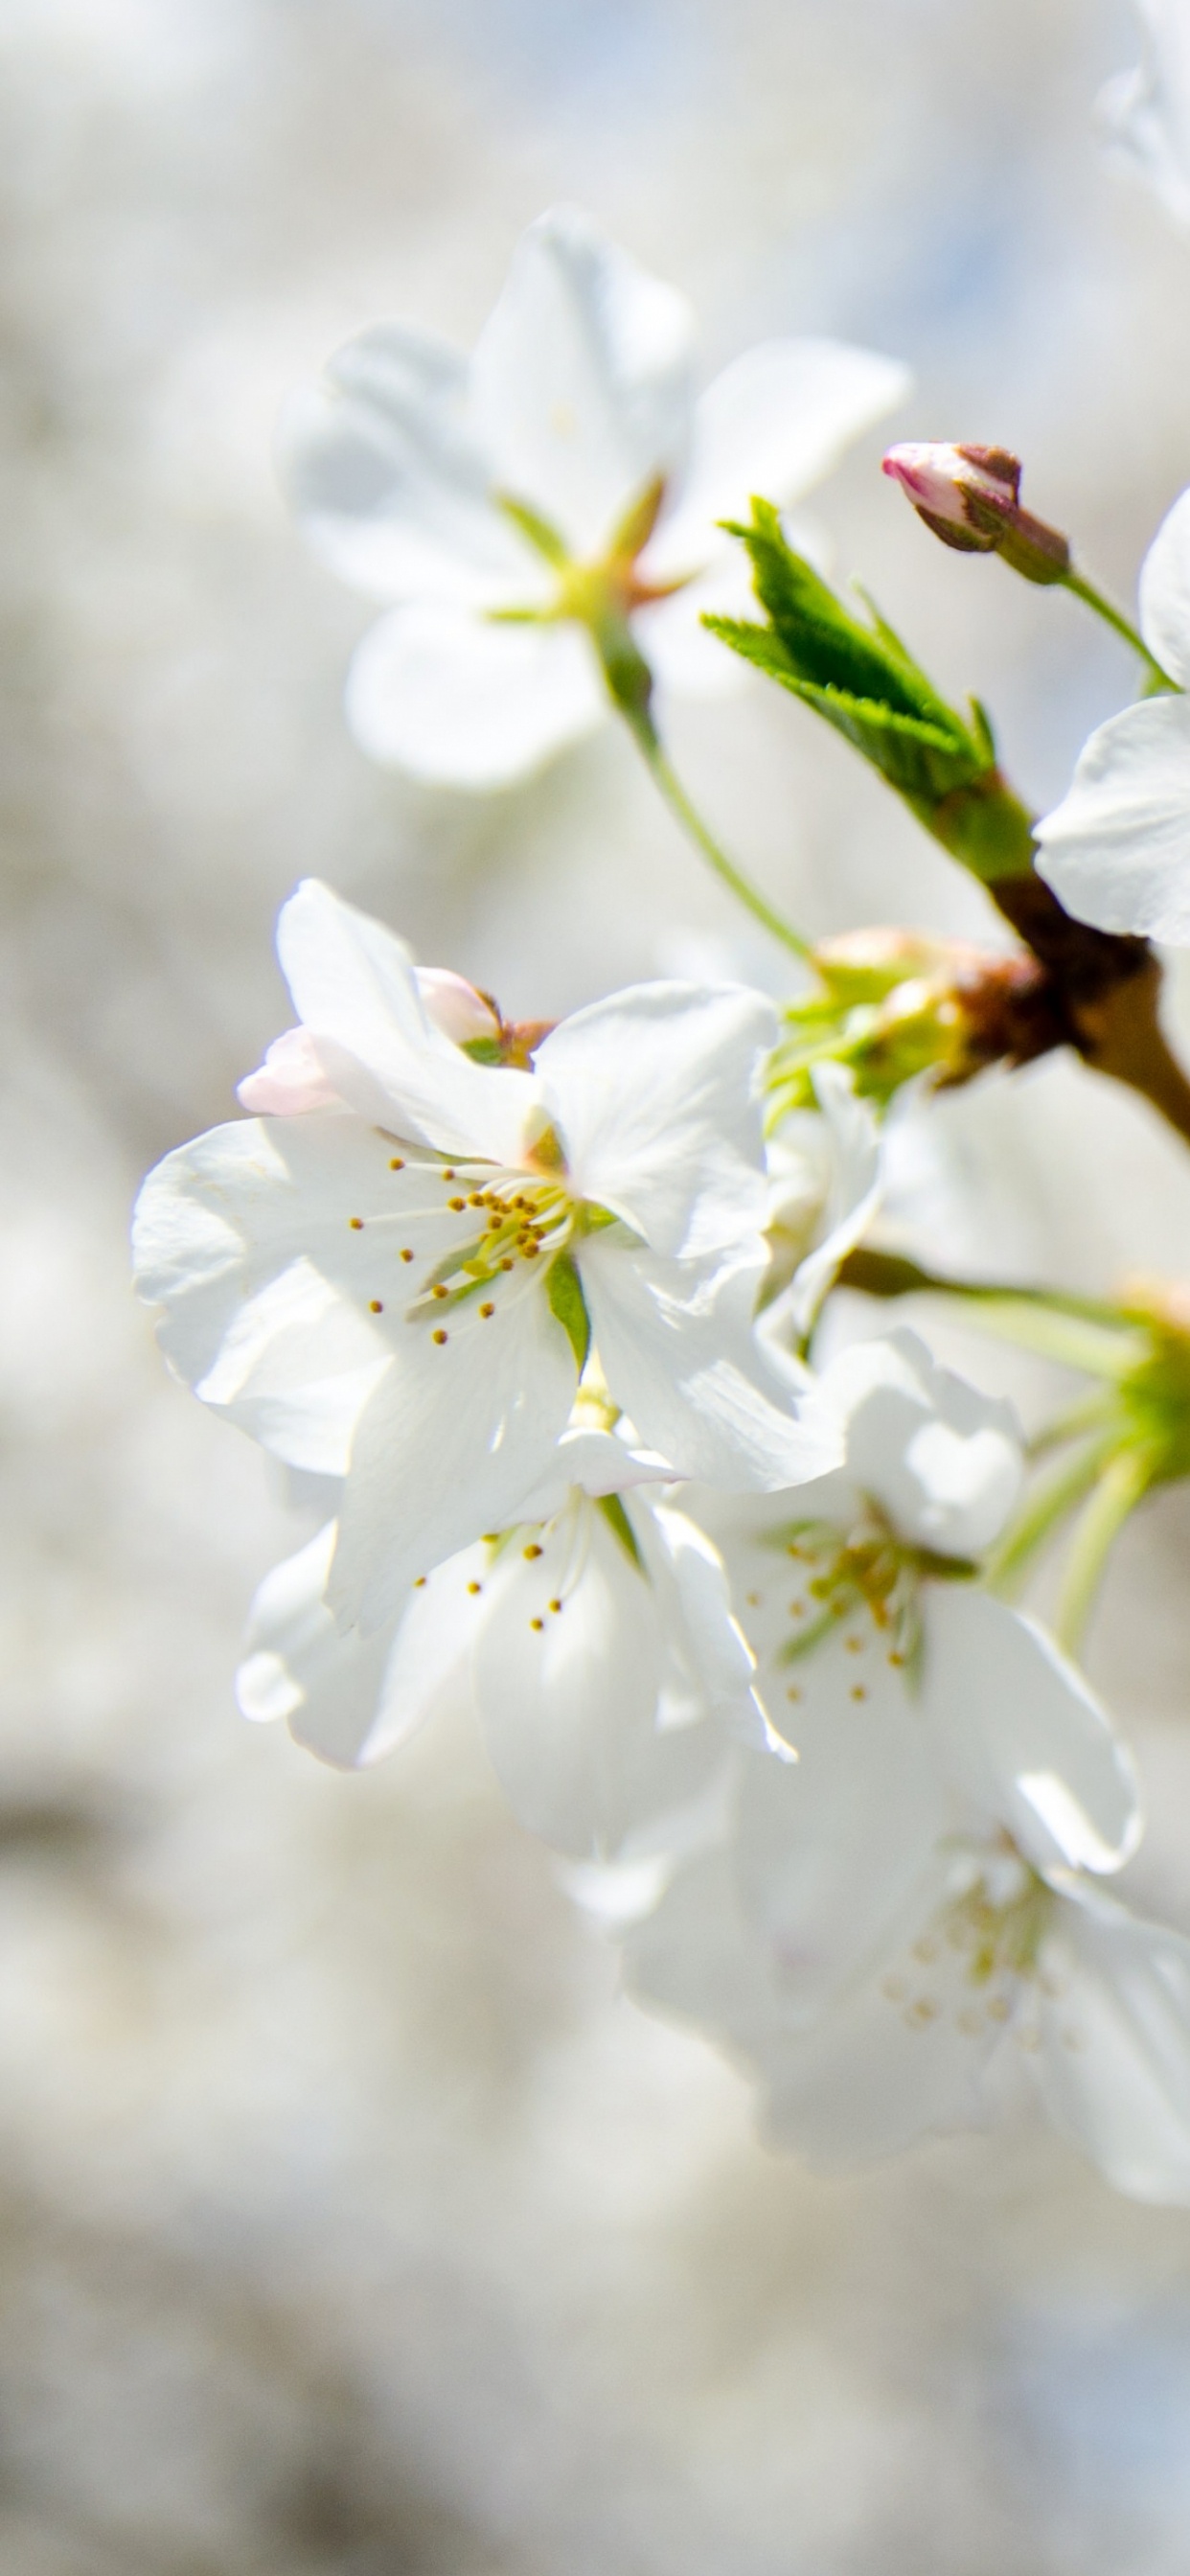 White Cherry Blossom in Close up Photography. Wallpaper in 1242x2688 Resolution